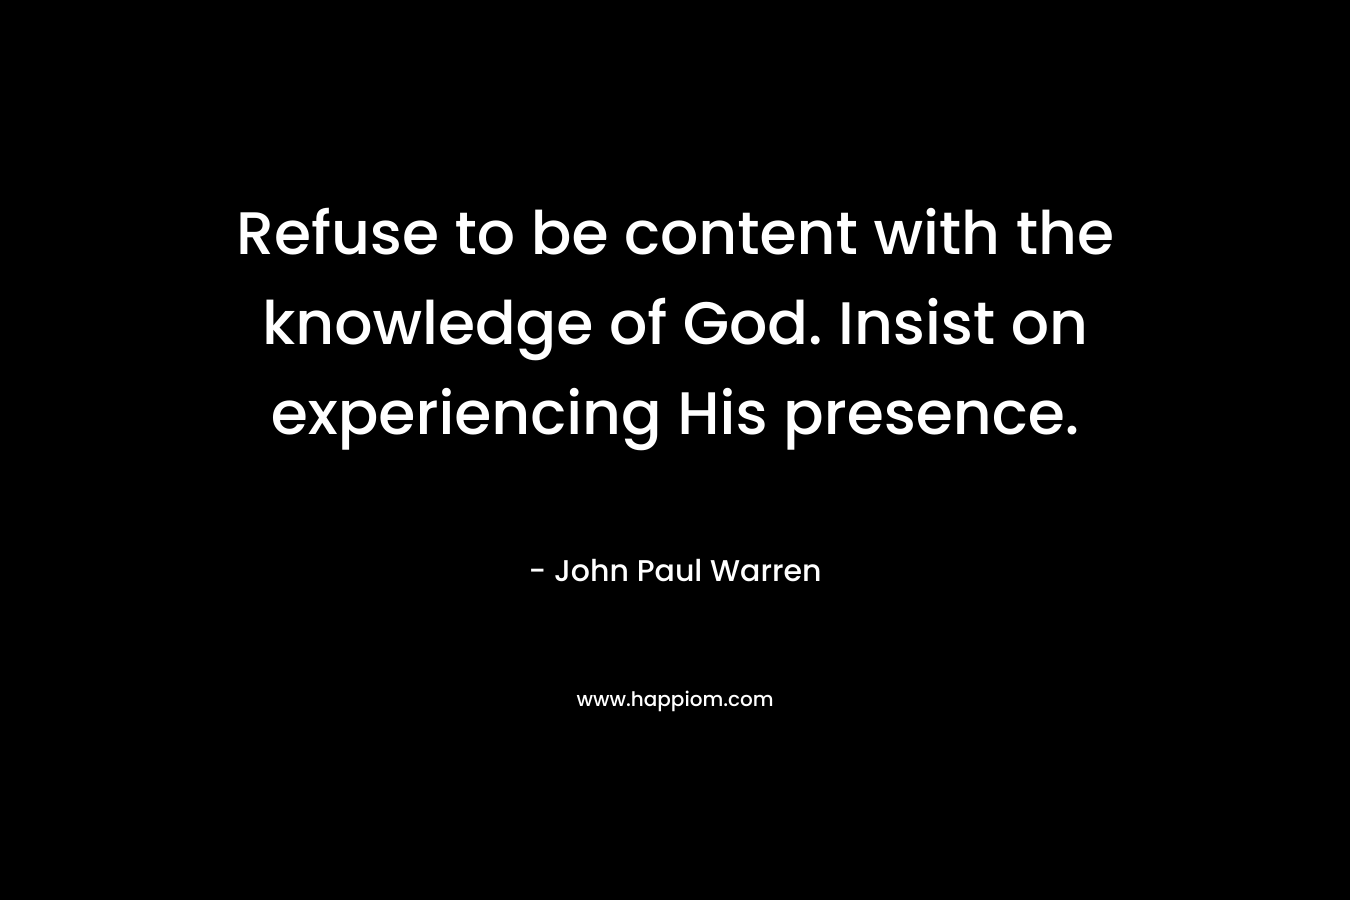 Refuse to be content with the knowledge of God. Insist on experiencing His presence.